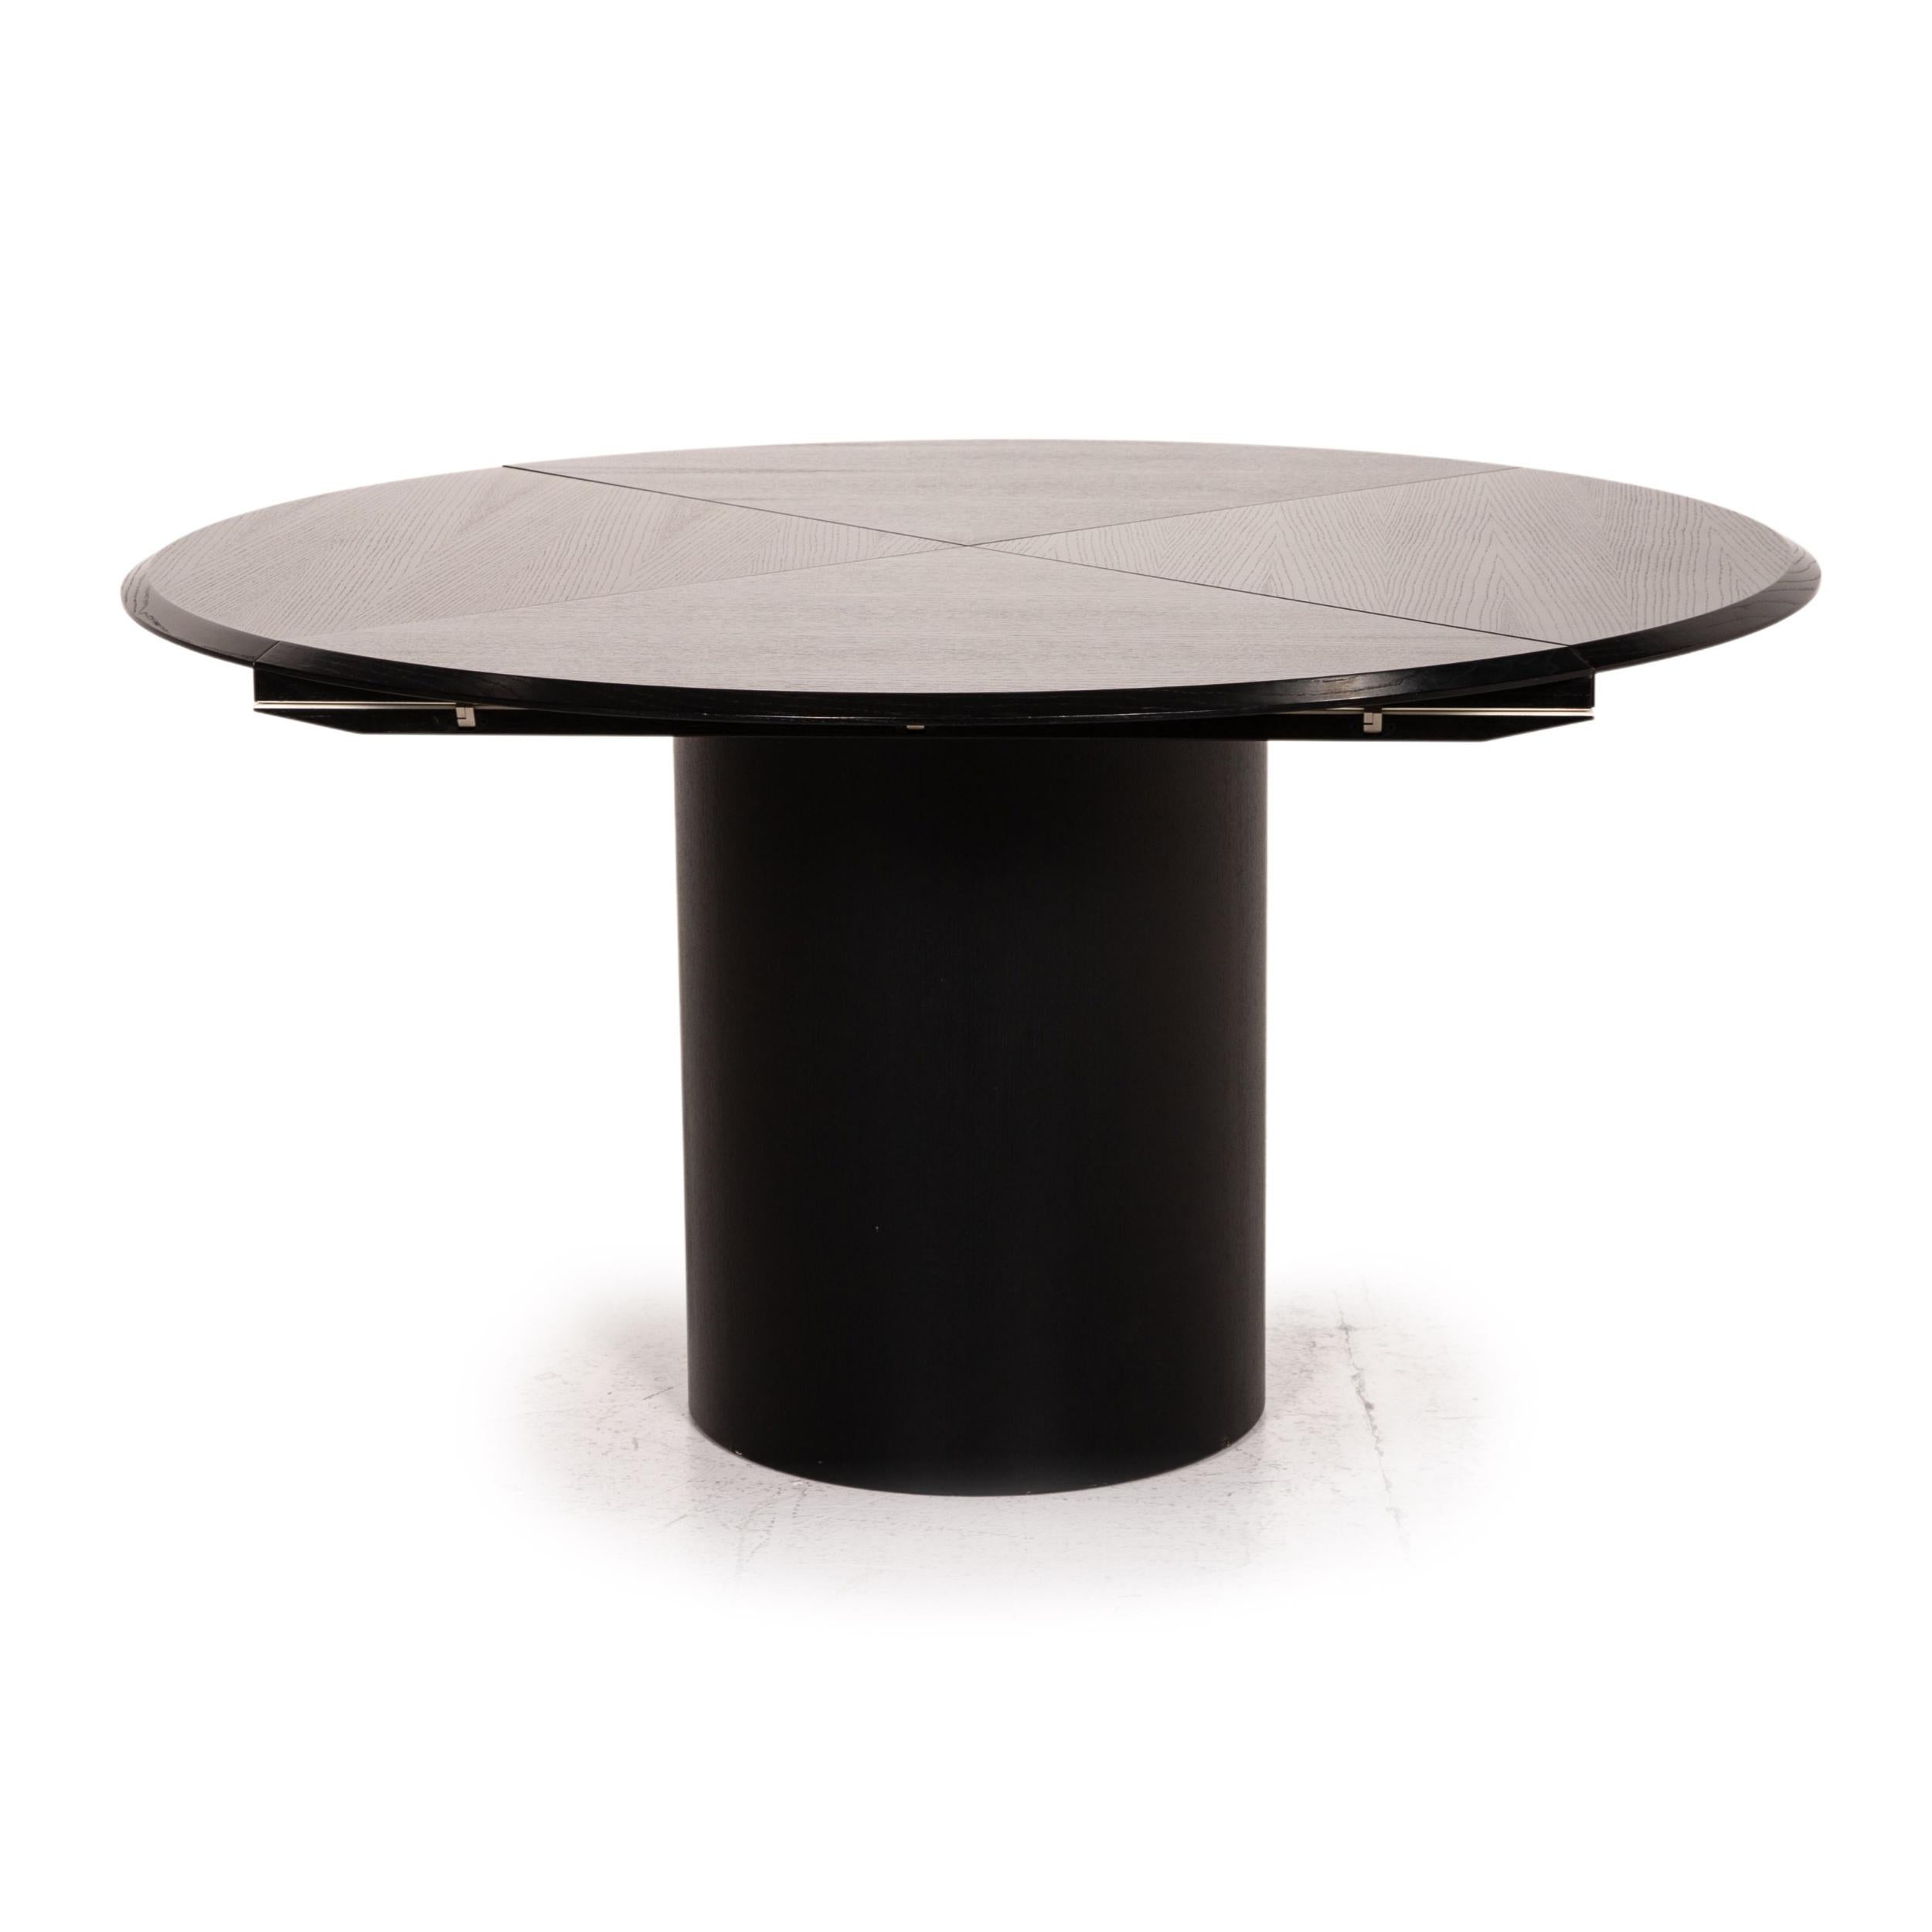 Rosenthal Quadrondo Dining Table Round Black and White Foldable Function Square 3